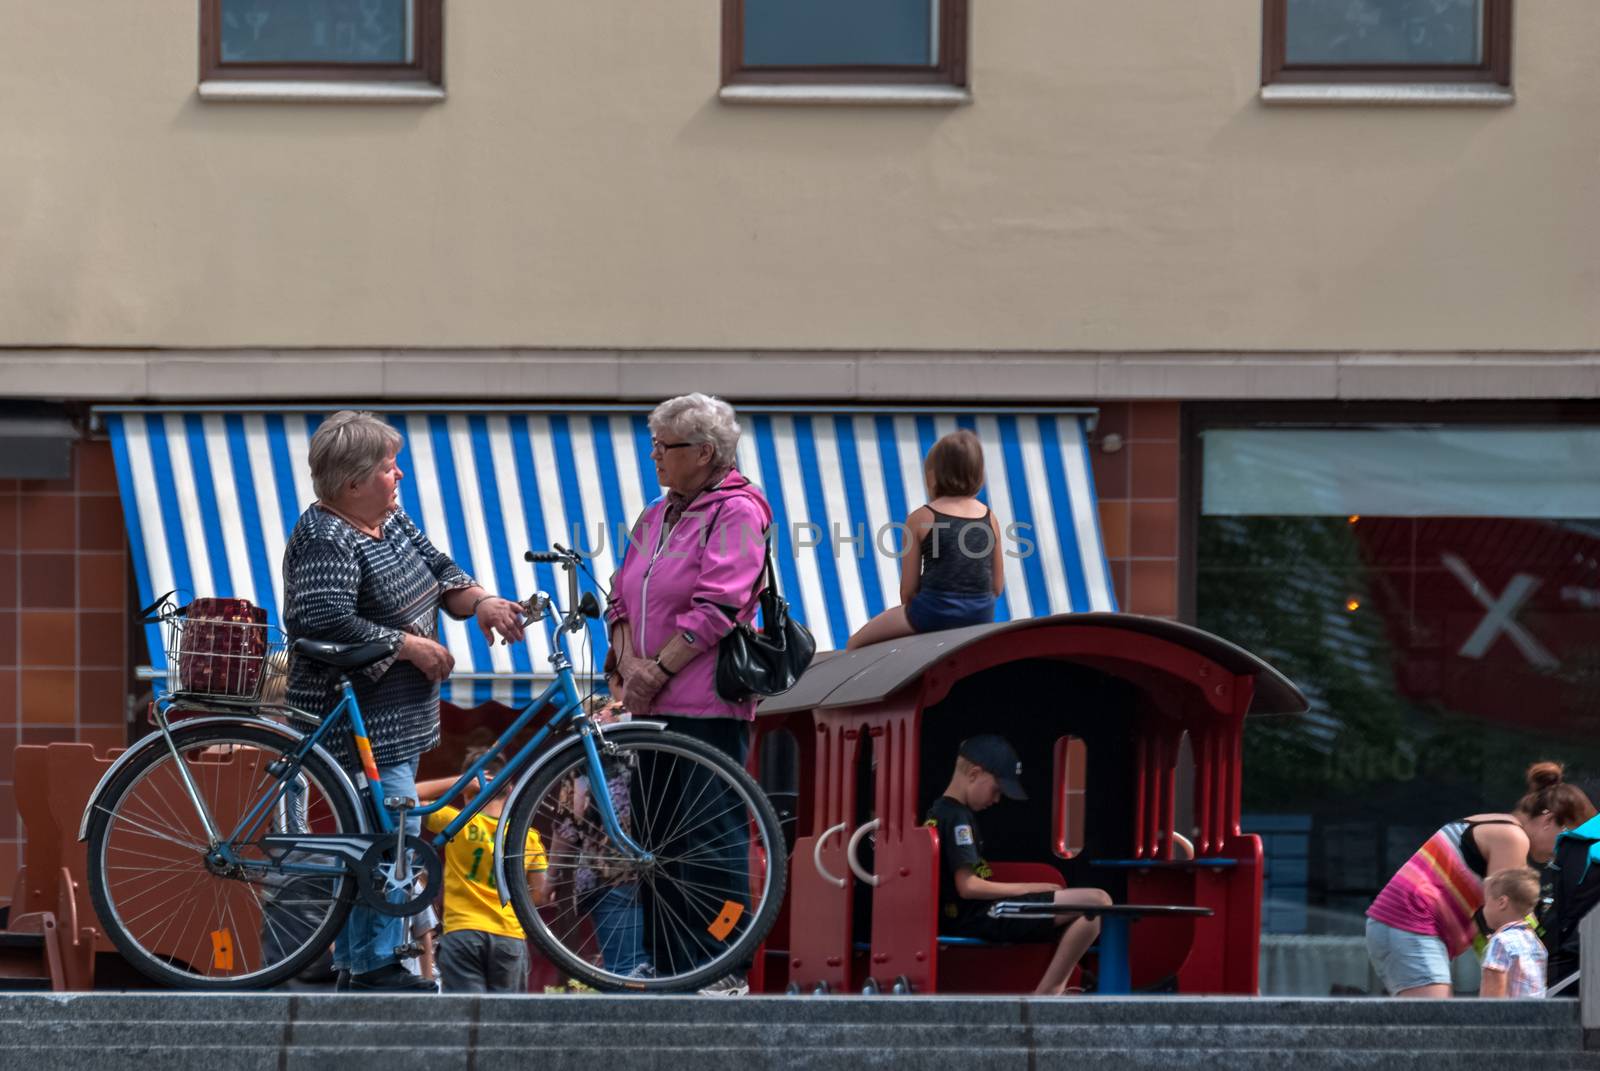 IMATRA, FINLAND, June 24: A leisurely conversation between two elderly women on the main street of the Finnish town of Imatra, 24 June 2016.